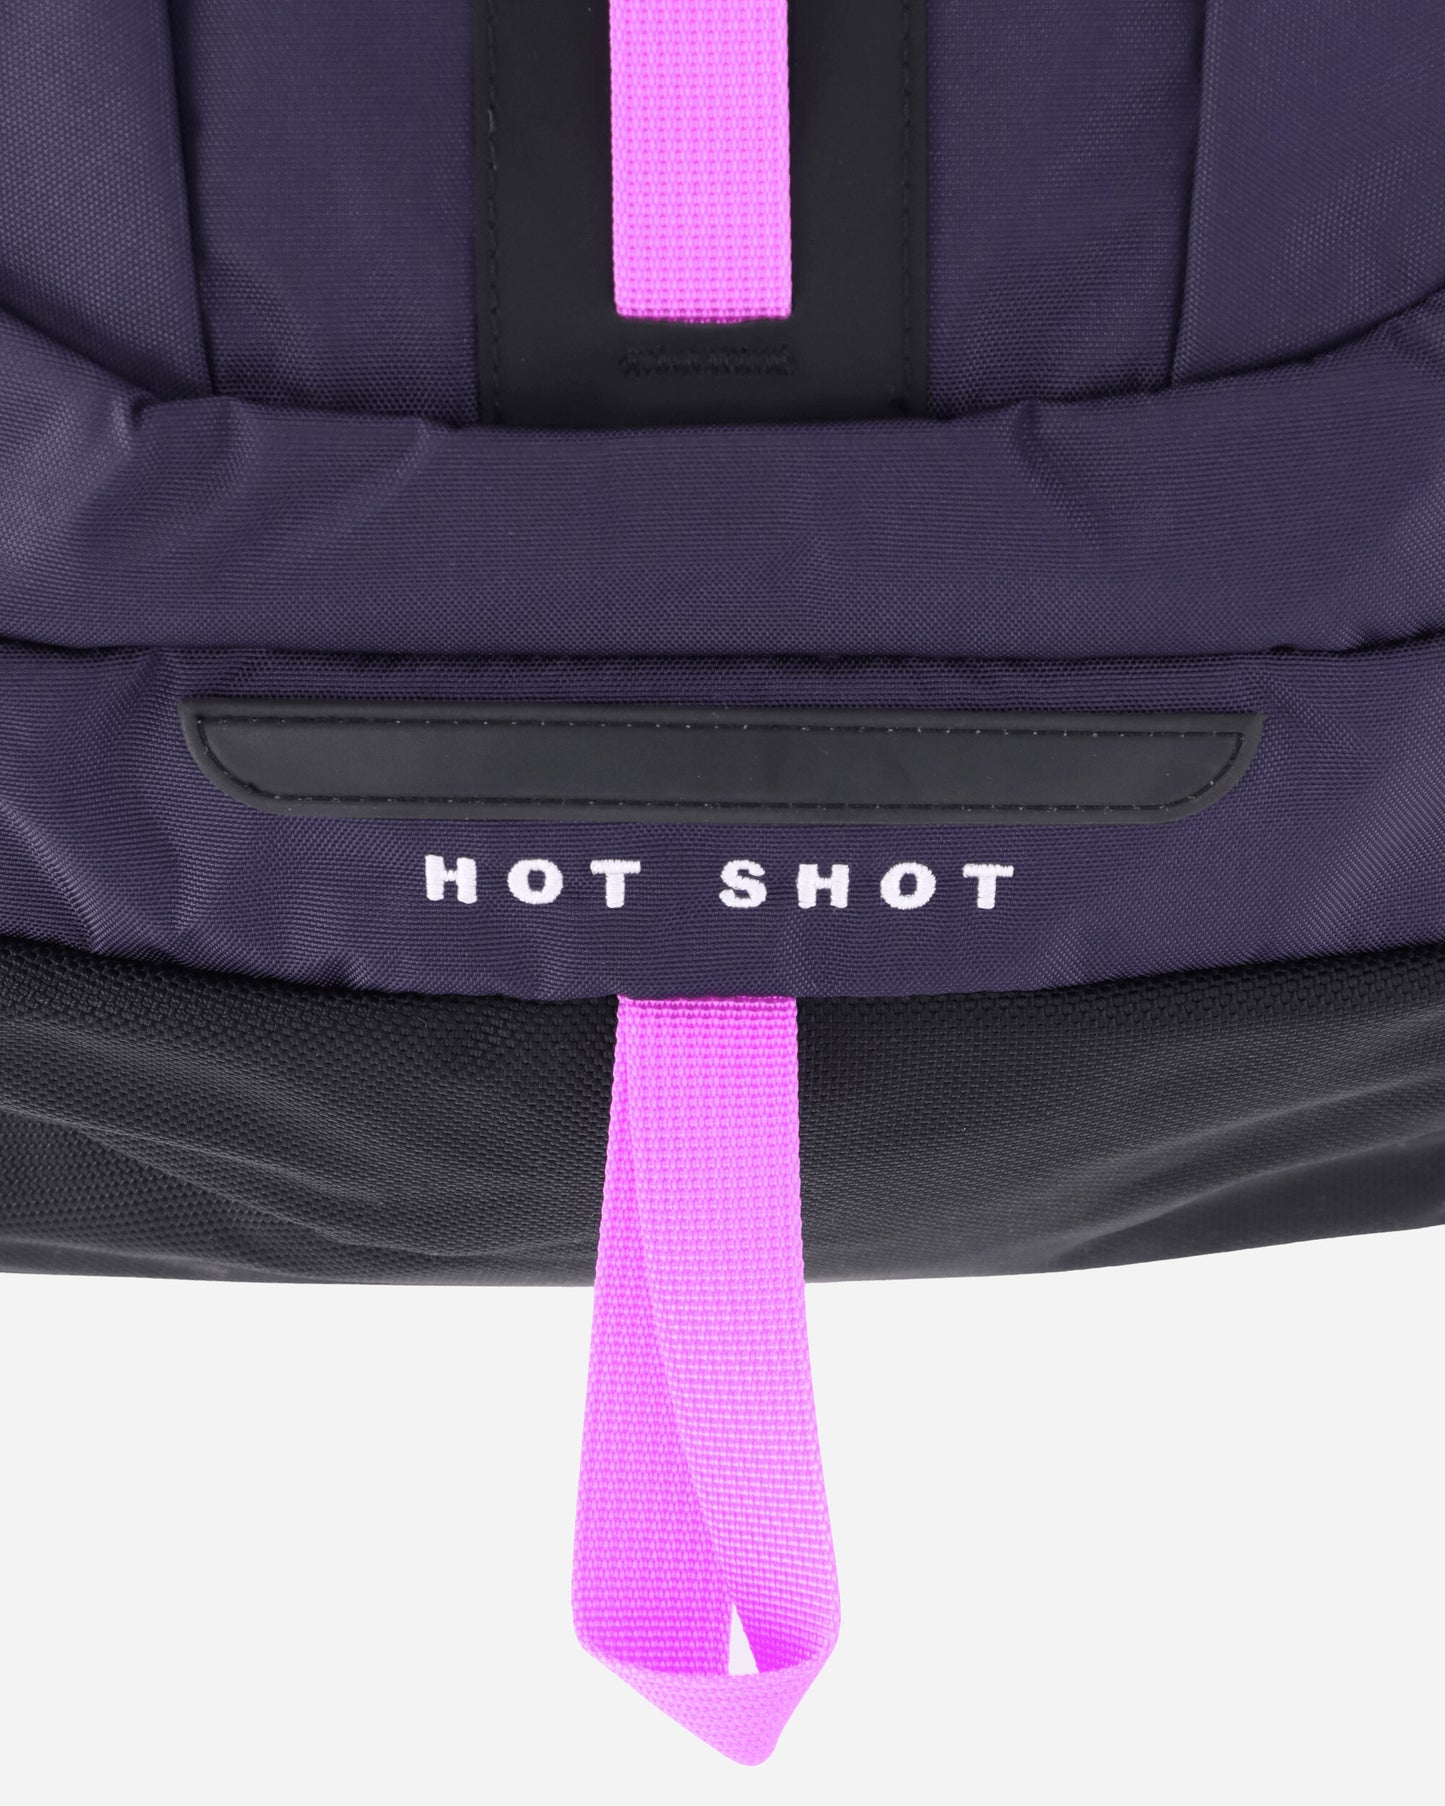 The North Face Hot Shot Se Amethyst Amethyst Purple/Violet Bags and Backpacks Backpacks NF0A3KYJ YIL1